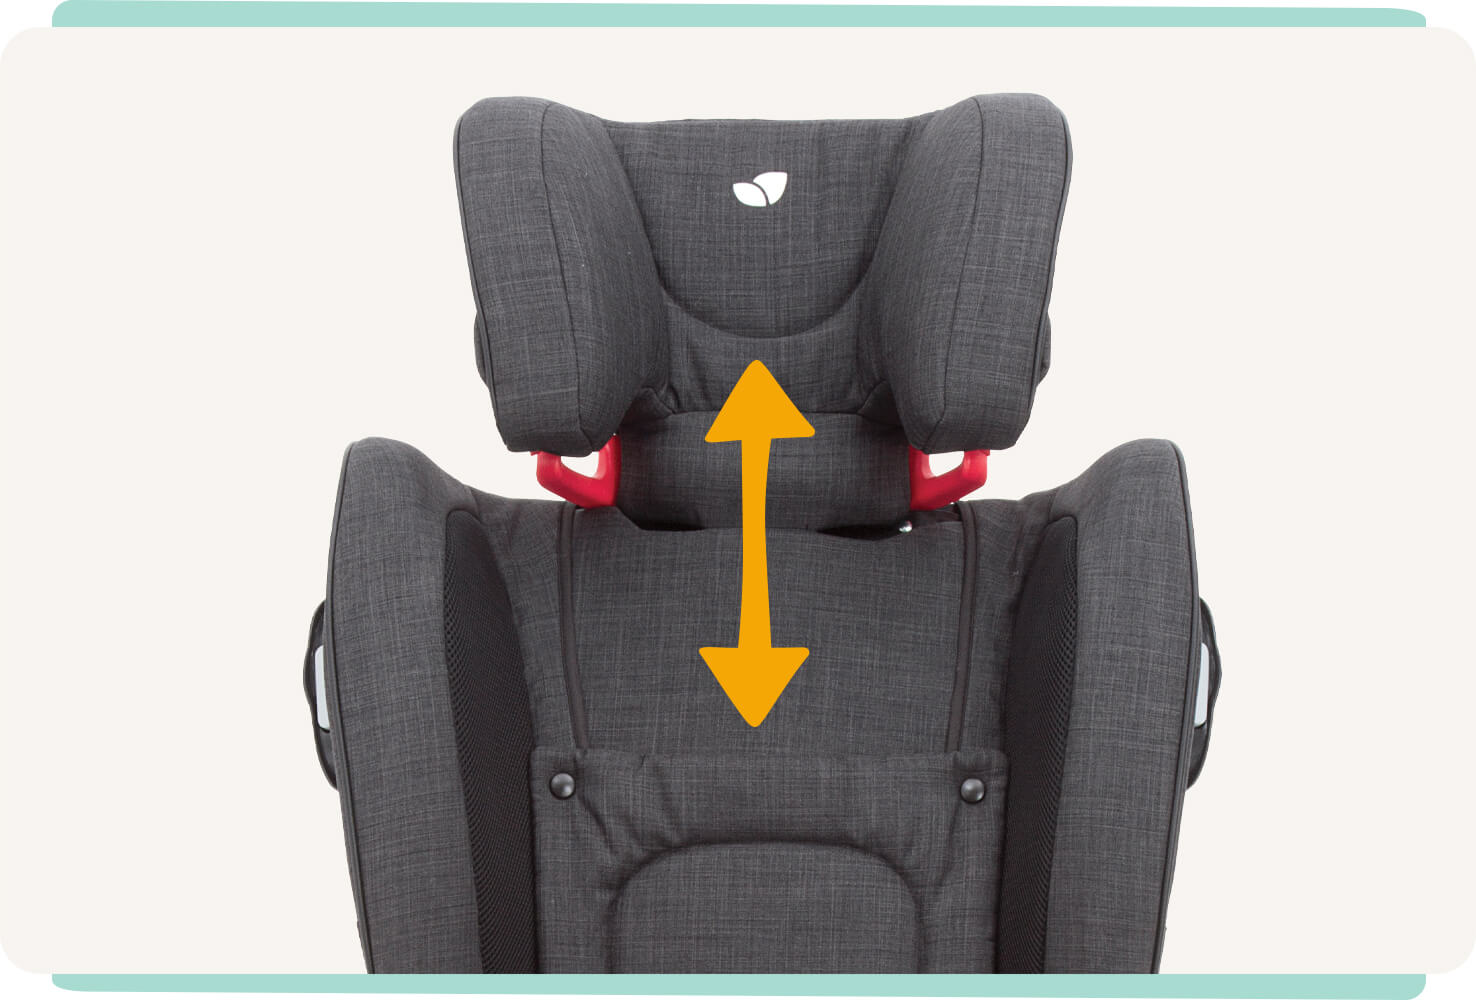 Joie stages ISOFIX car seat with headrest fully extended and an arrow pointing up.  
